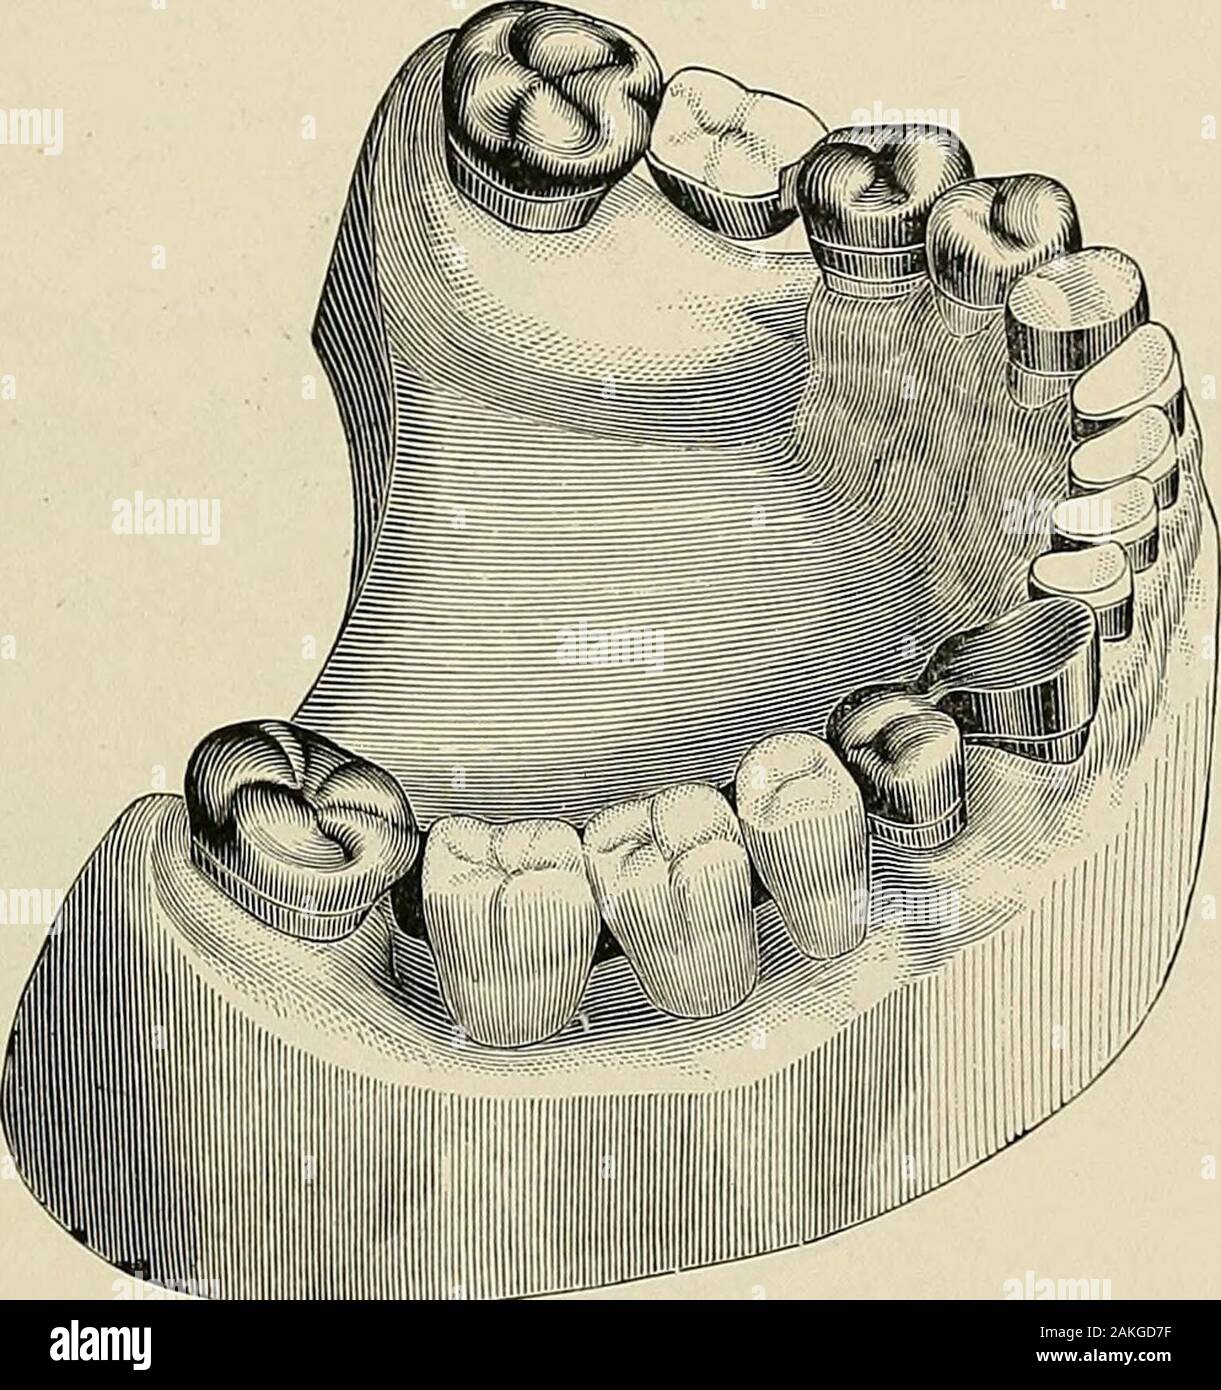 A practical treatise on mechanical dentistry . , which also shows the capped teeth and stumps..This figure likewise shows the results of the novel method em-ployed in crowning the incisors. Gold collars were fitted tight onthe necks of the incisor stumps, and the new style porcelain capsadjusted in the collars, and set in the oxyphosphate cement whichhad been packed into the collars; thus at the same time fasteningthe collars on the stumps and the caps in the collars. BRIDGE DENTURES. 623 Fig. 628 illustrates the finished crowns and bridges, which latterwere secured in position by placing a sm Stock Photo